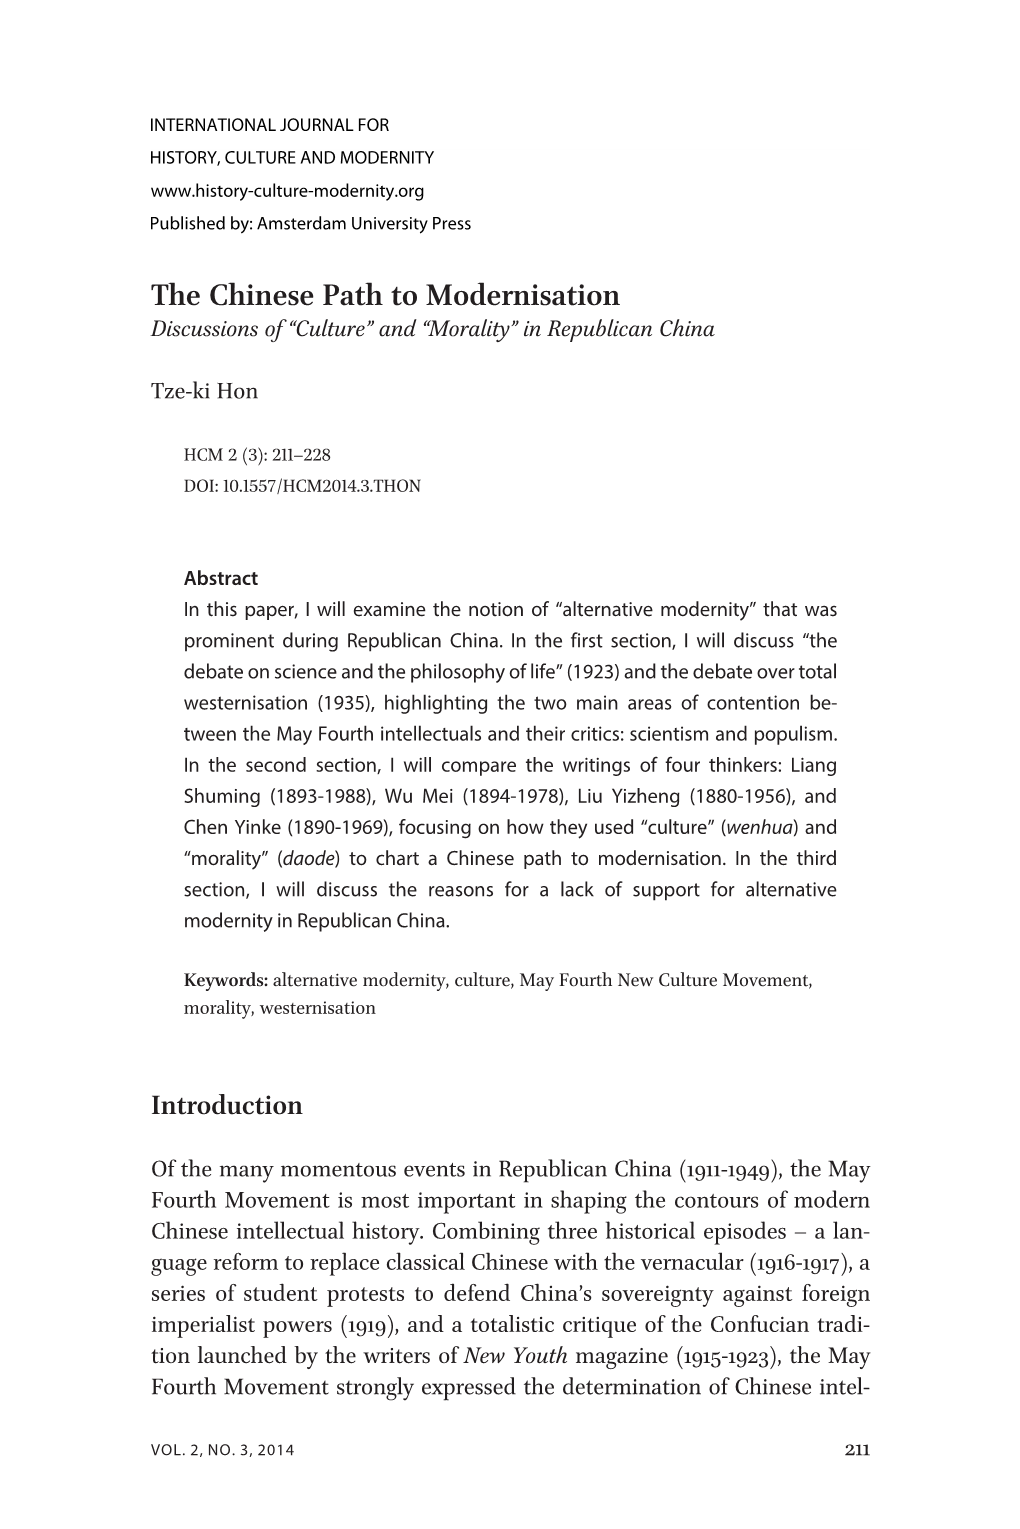 The Chinese Path to Modernisation Discussions of “Culture” and “Morality” in Republican China